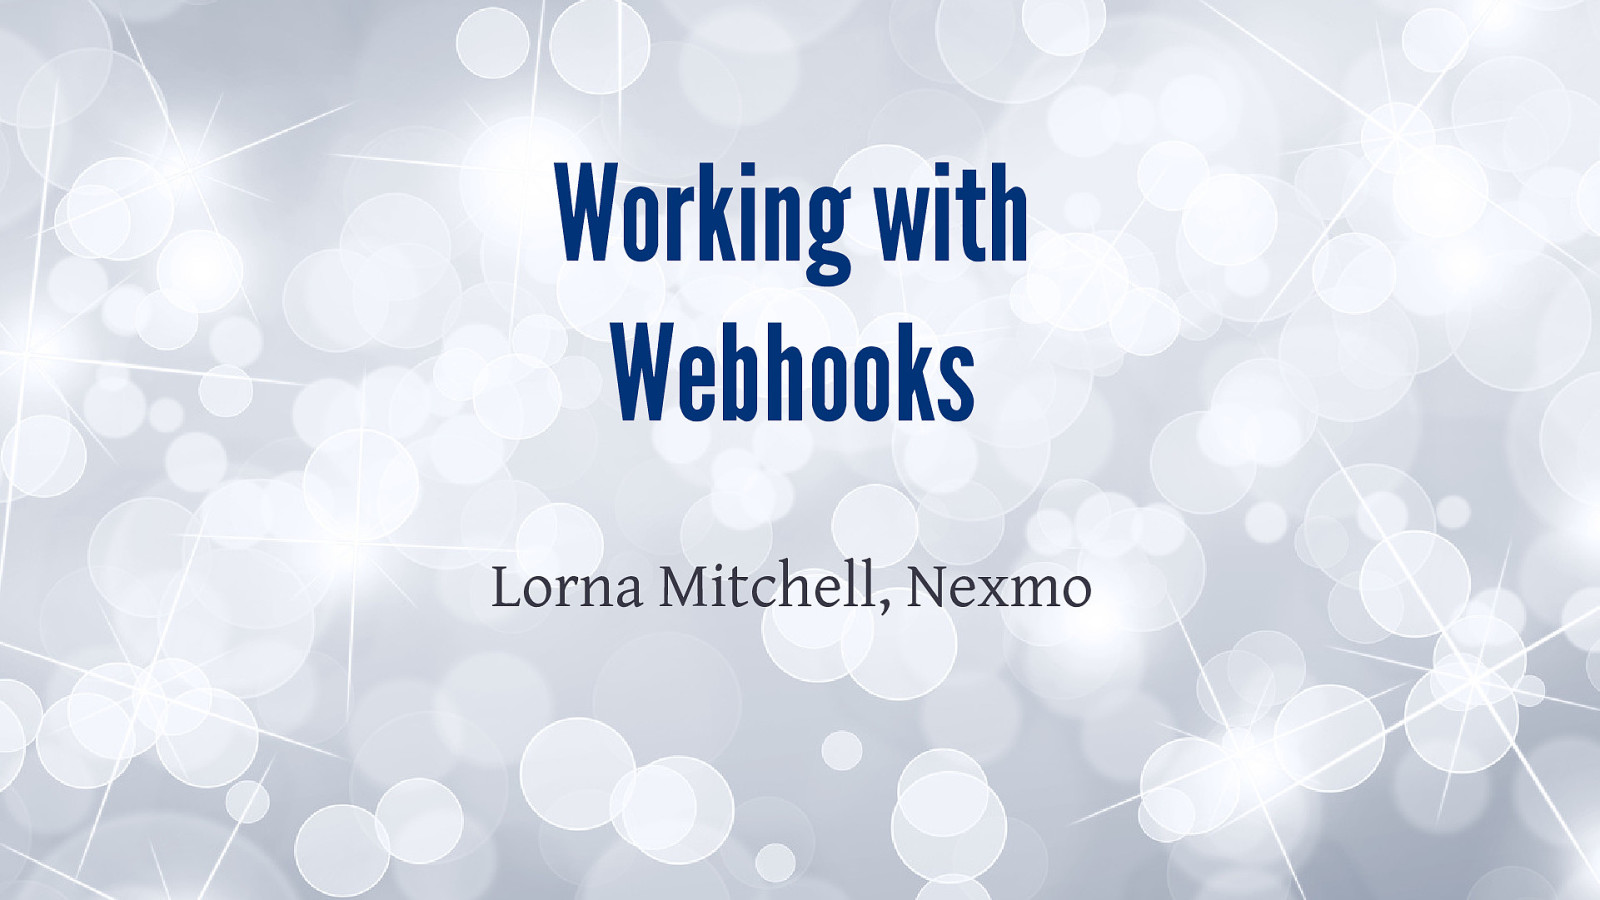 Working with Webhooks